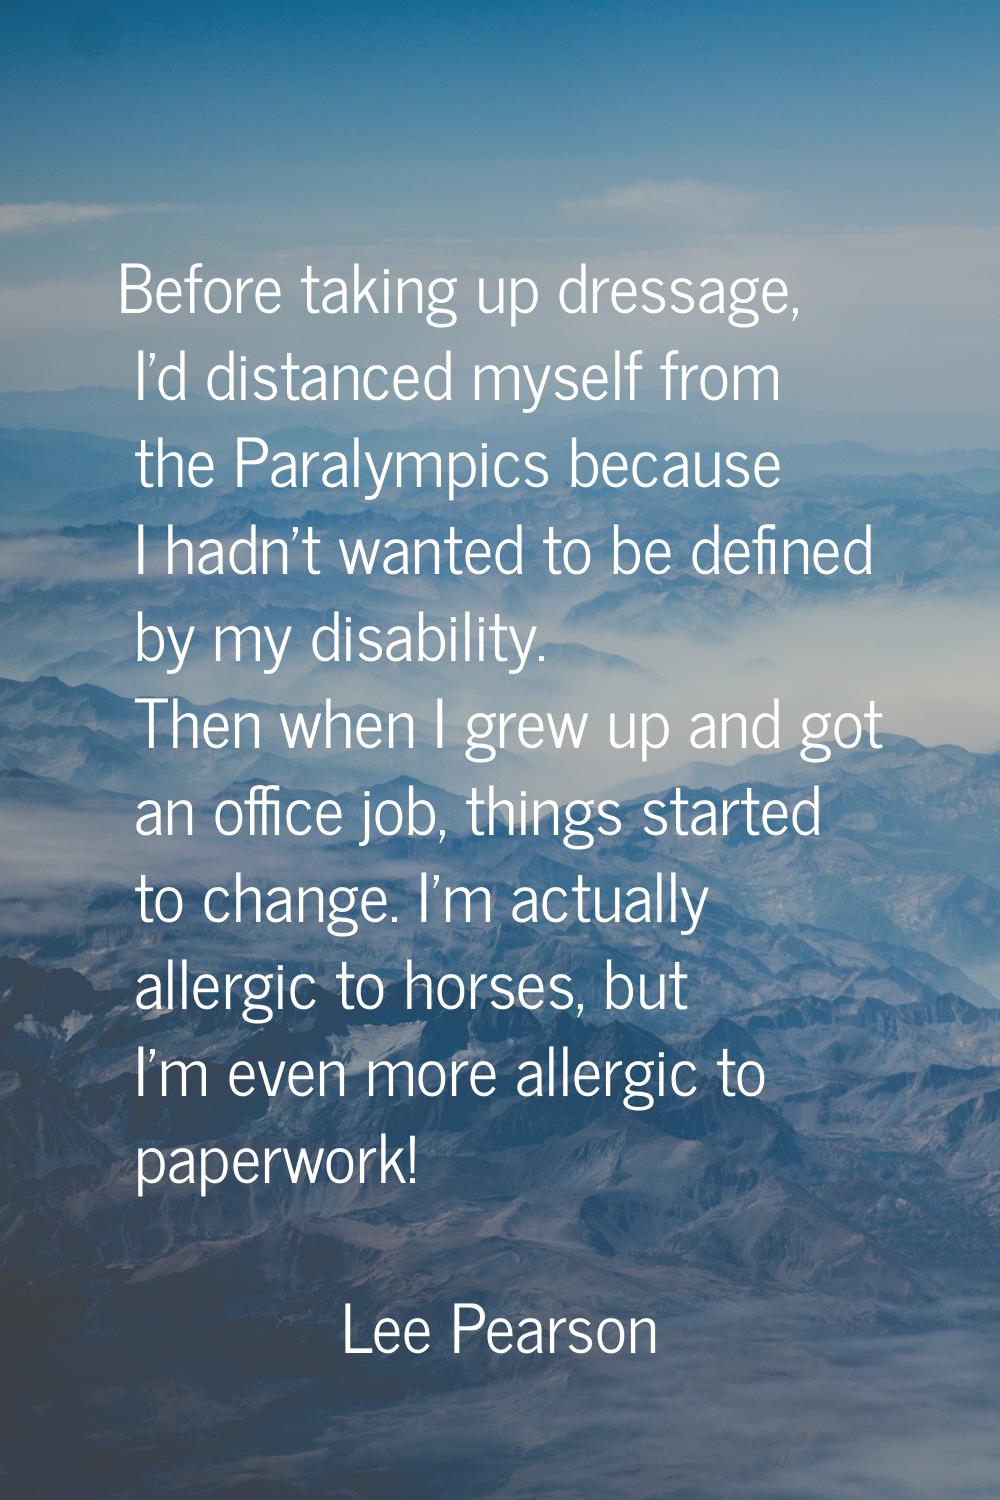 Before taking up dressage, I'd distanced myself from the Paralympics because I hadn't wanted to be 